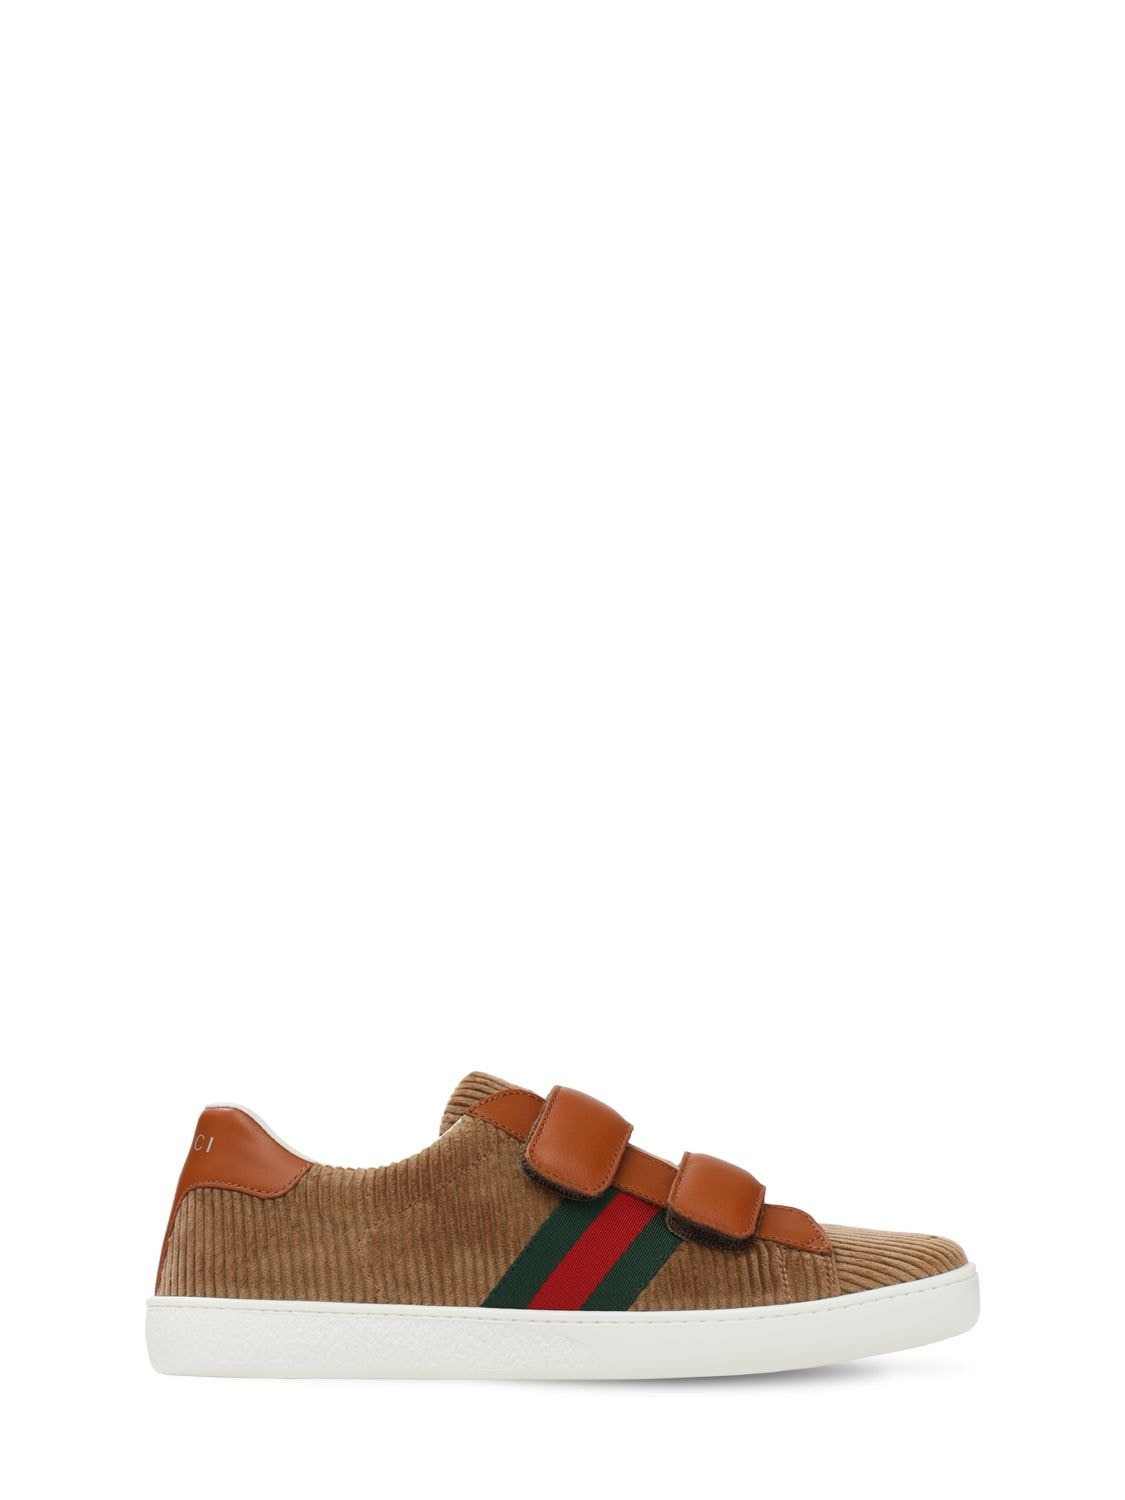 Gucci Kids' New Ace Corduroy Strap Sneakers In Cammel